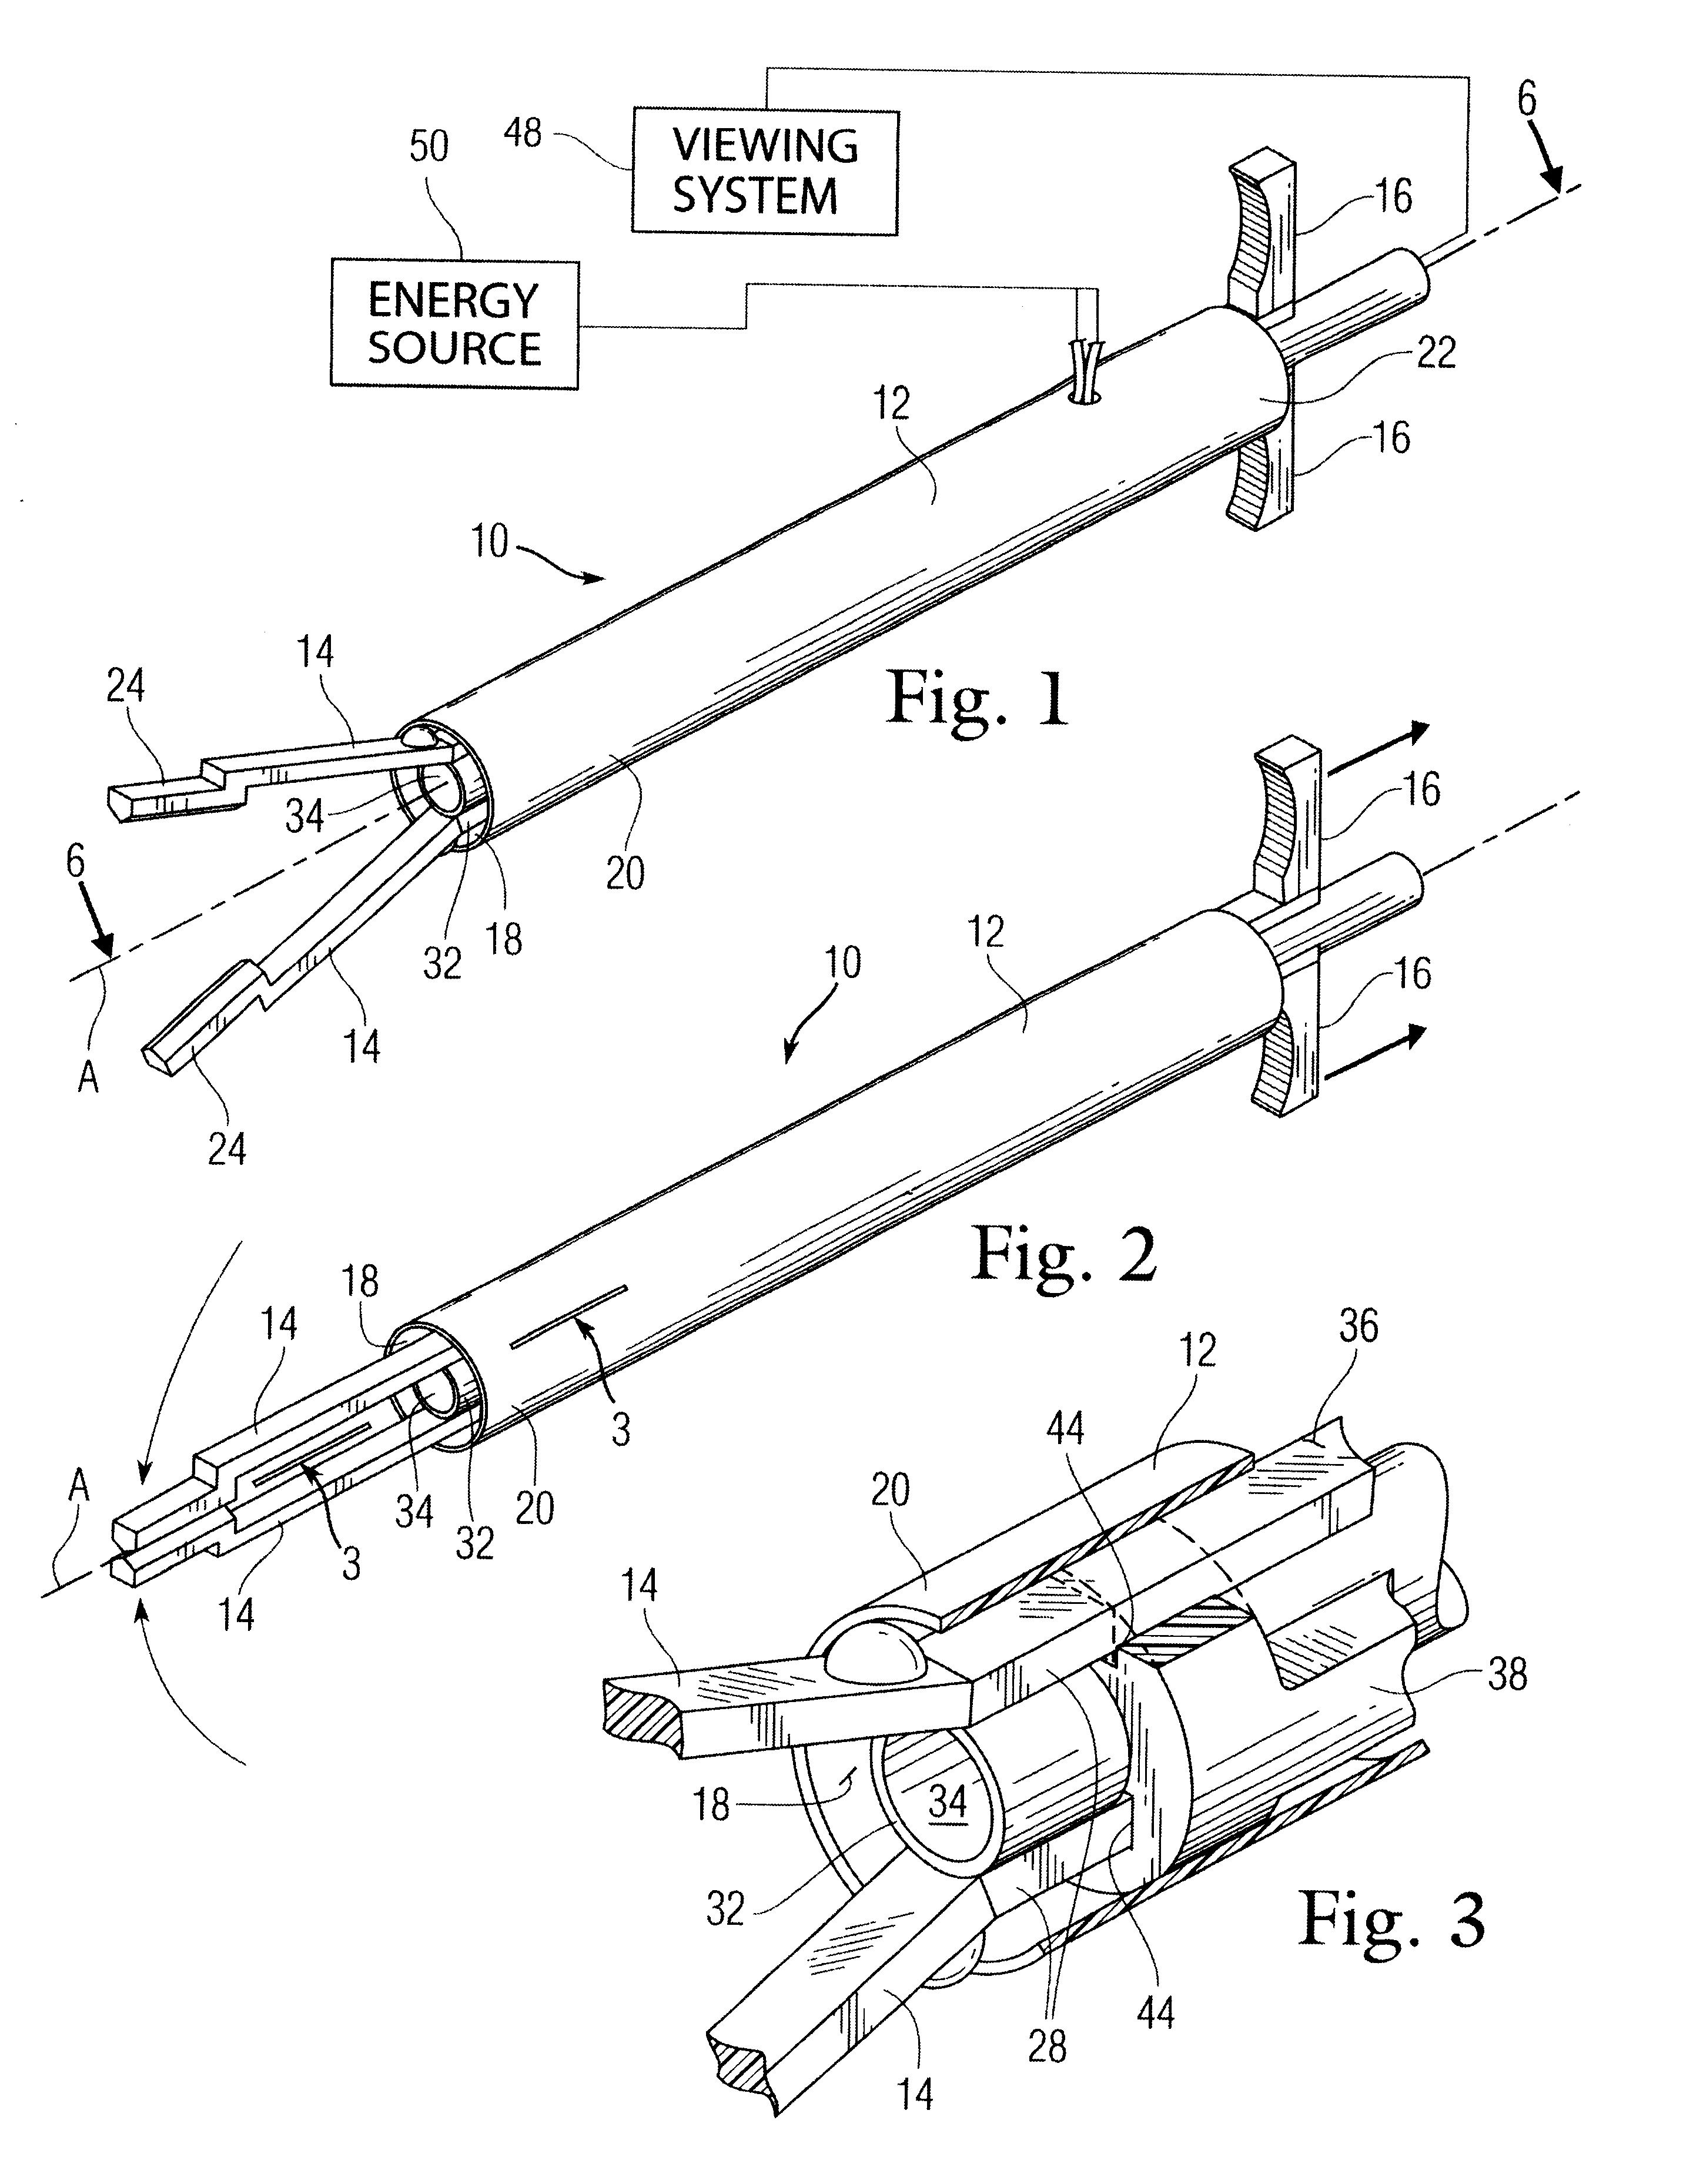 Occlusion apparatus and method for necrotizing anatomical tissue structures